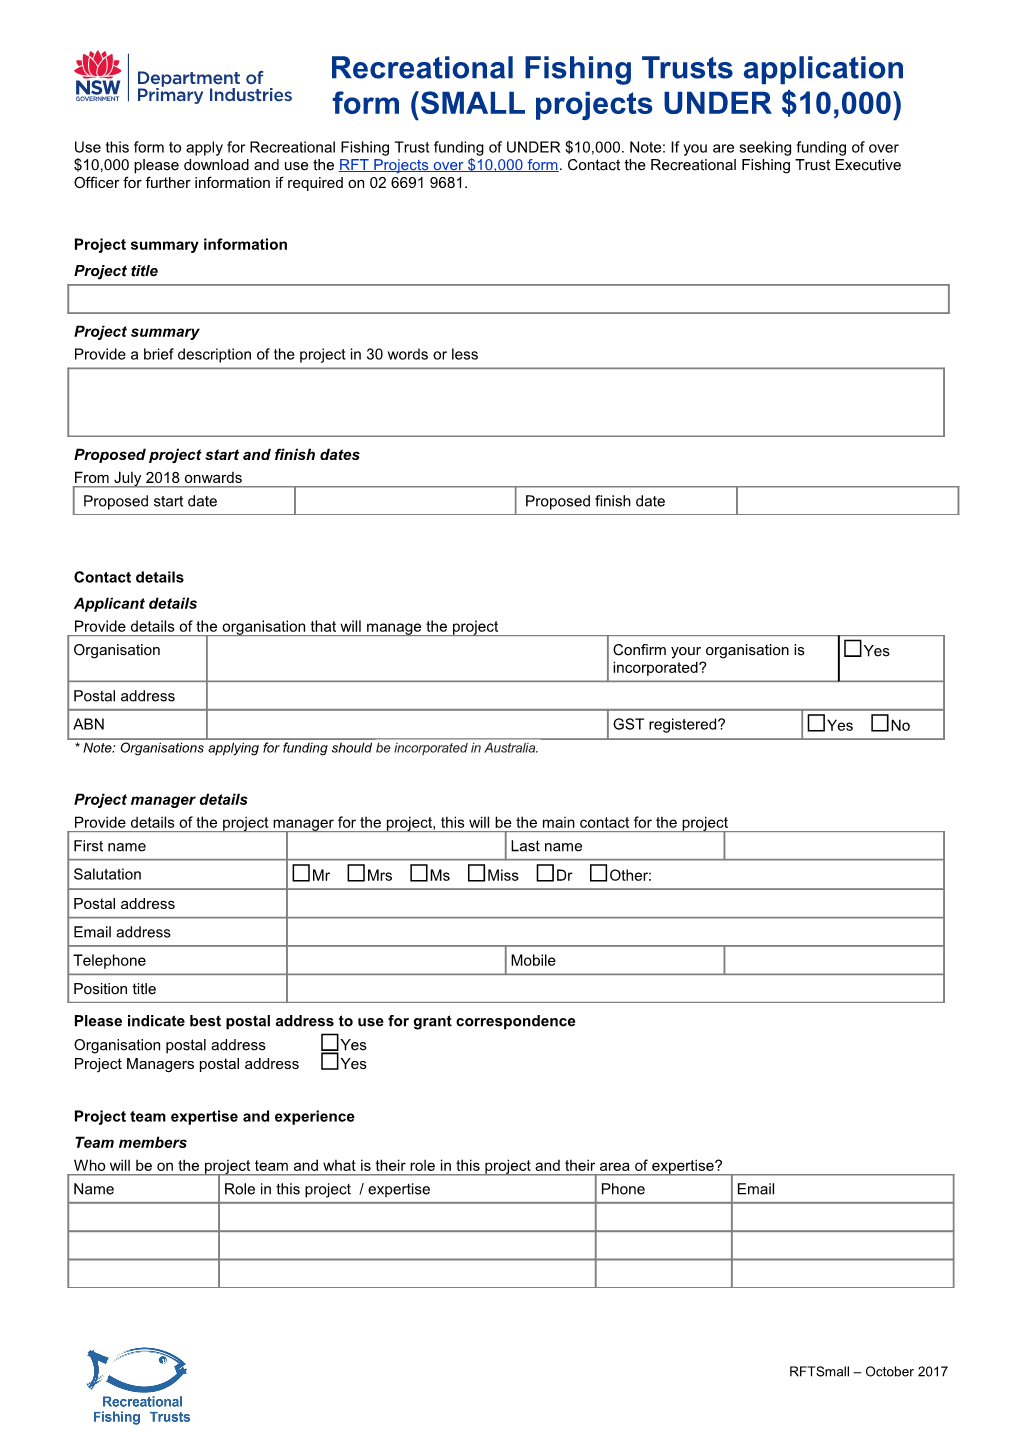 Recreational Fishing Trusts Funding Application Form UNDER $10,000